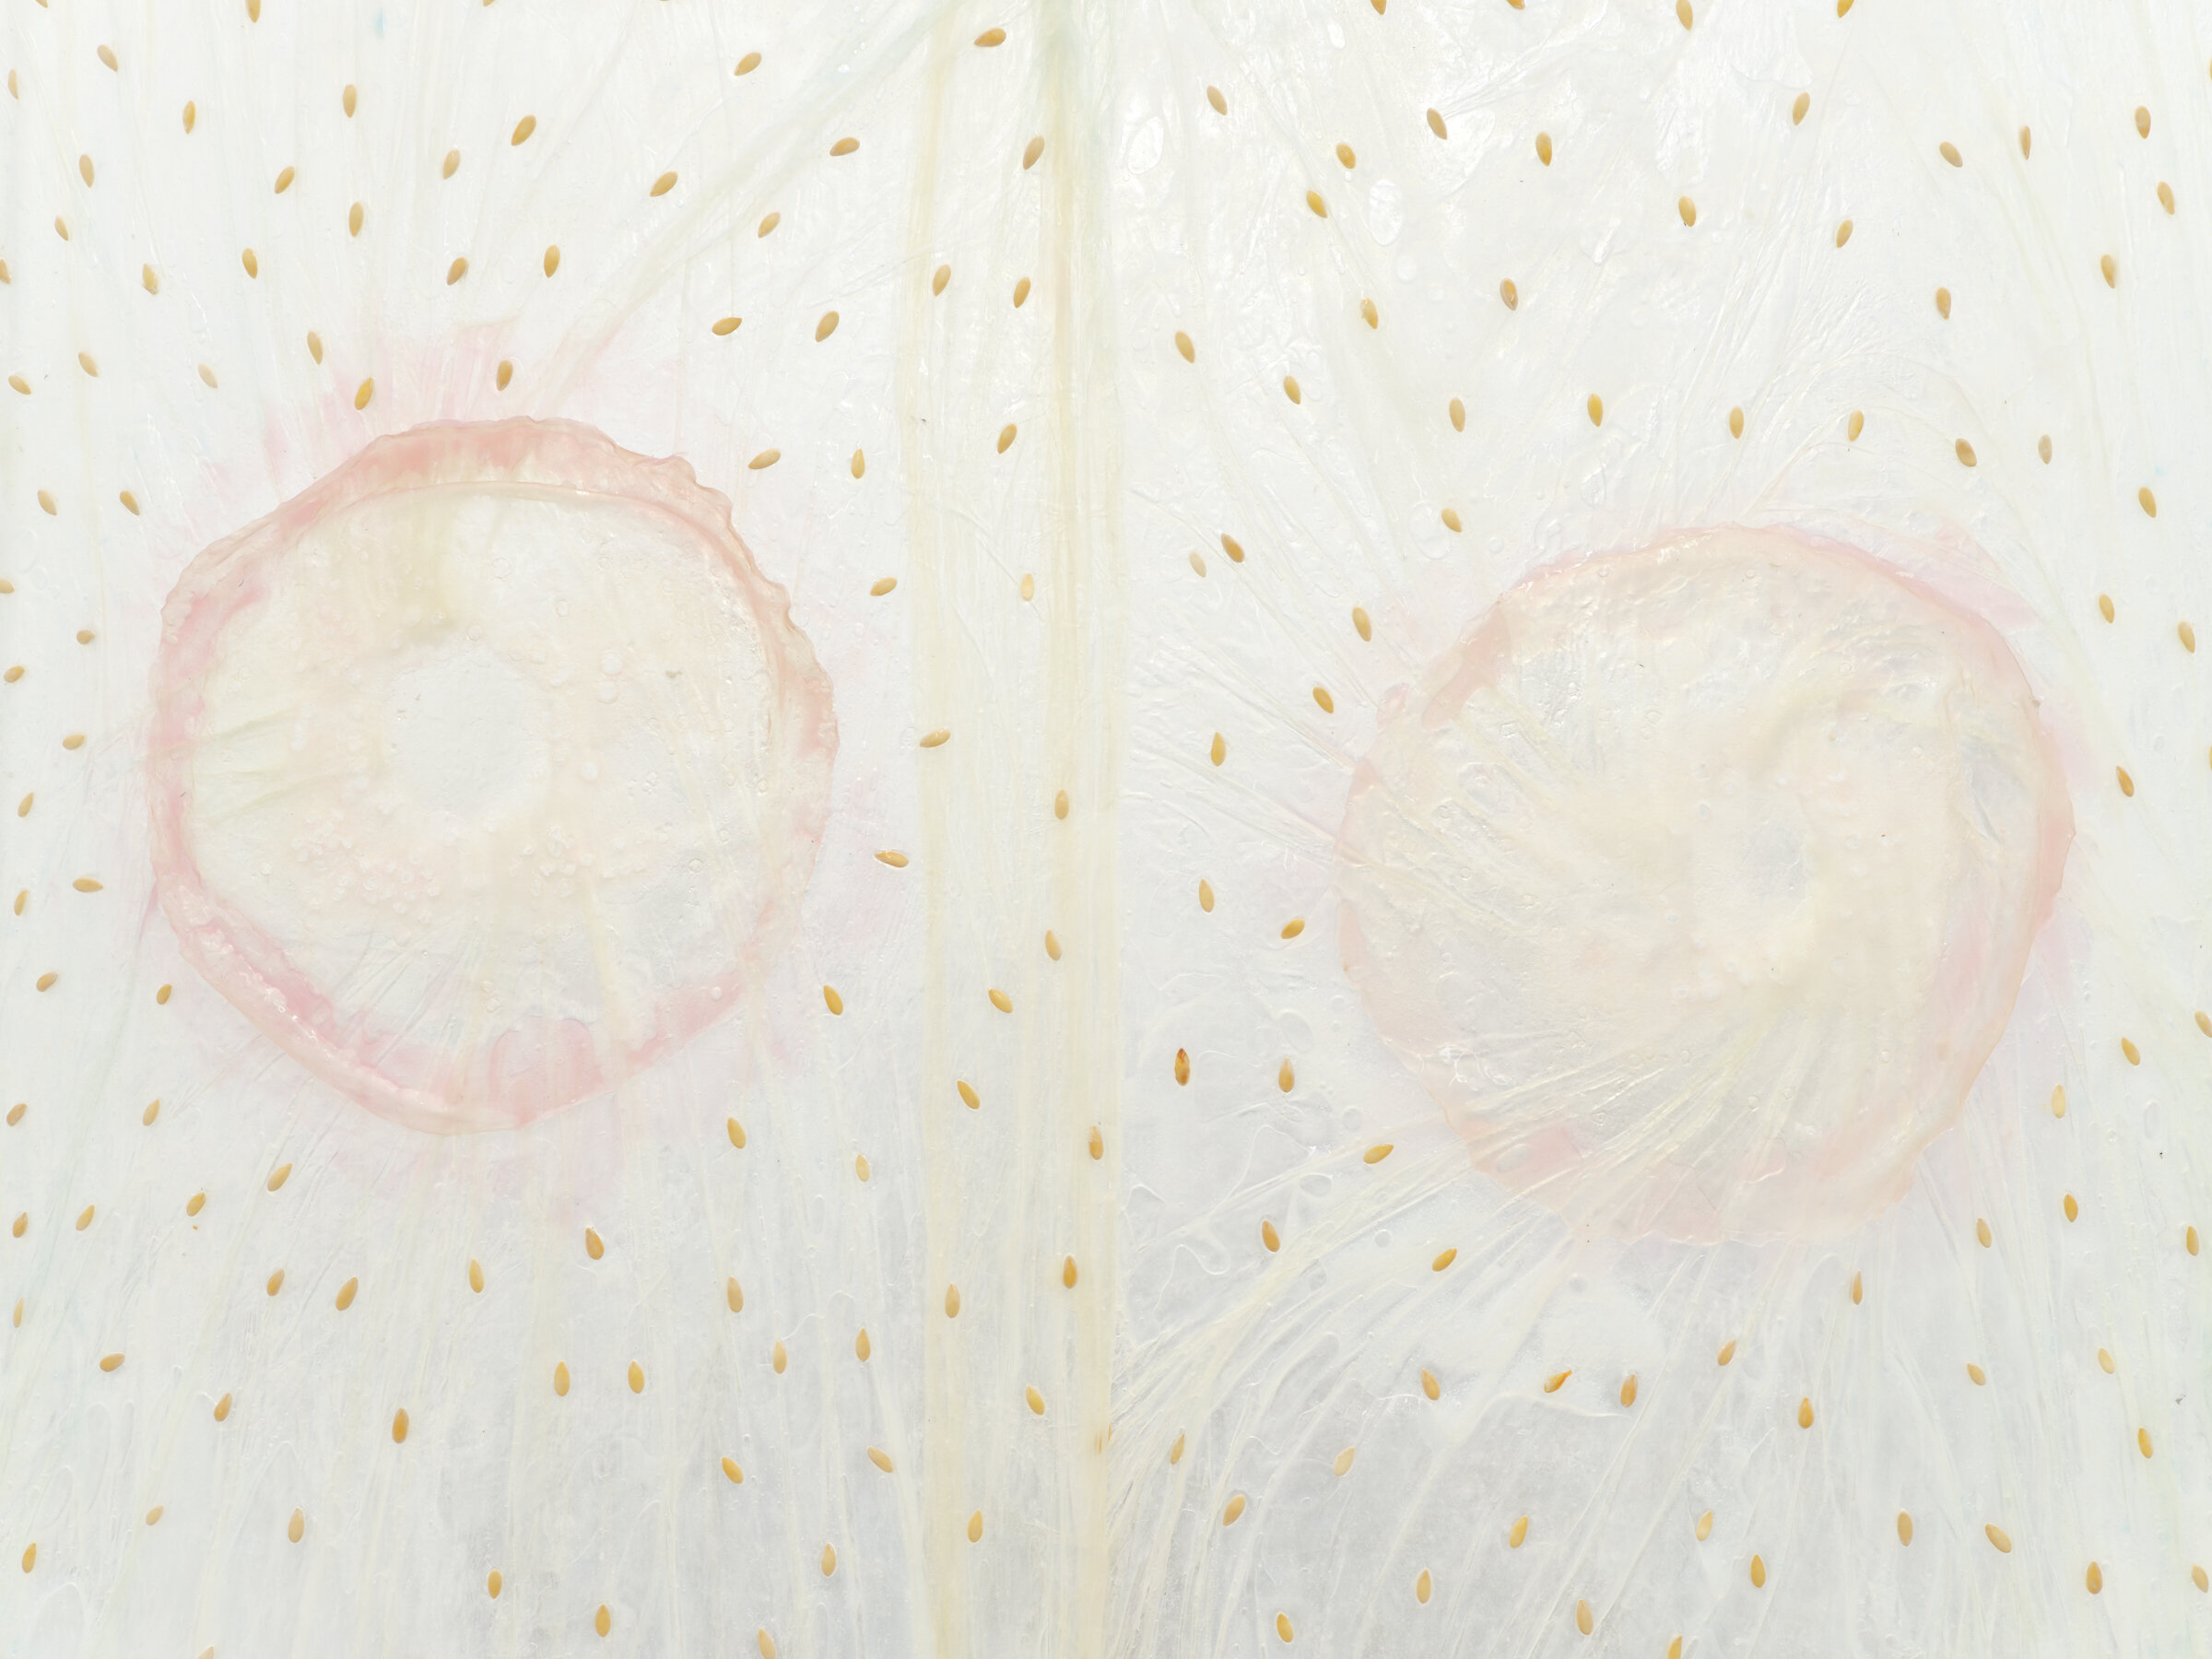  Karinne Smith  Longburger , 2021 (detail) collagen dyed with soda, melon seeds, baby powder, agar agar,  glycerin, sprinkles, silicone, clamps, cotton rope, cast plaster melons  116 x 39 x 36 inches (295 x 99 x 91 cm) (KS2) 